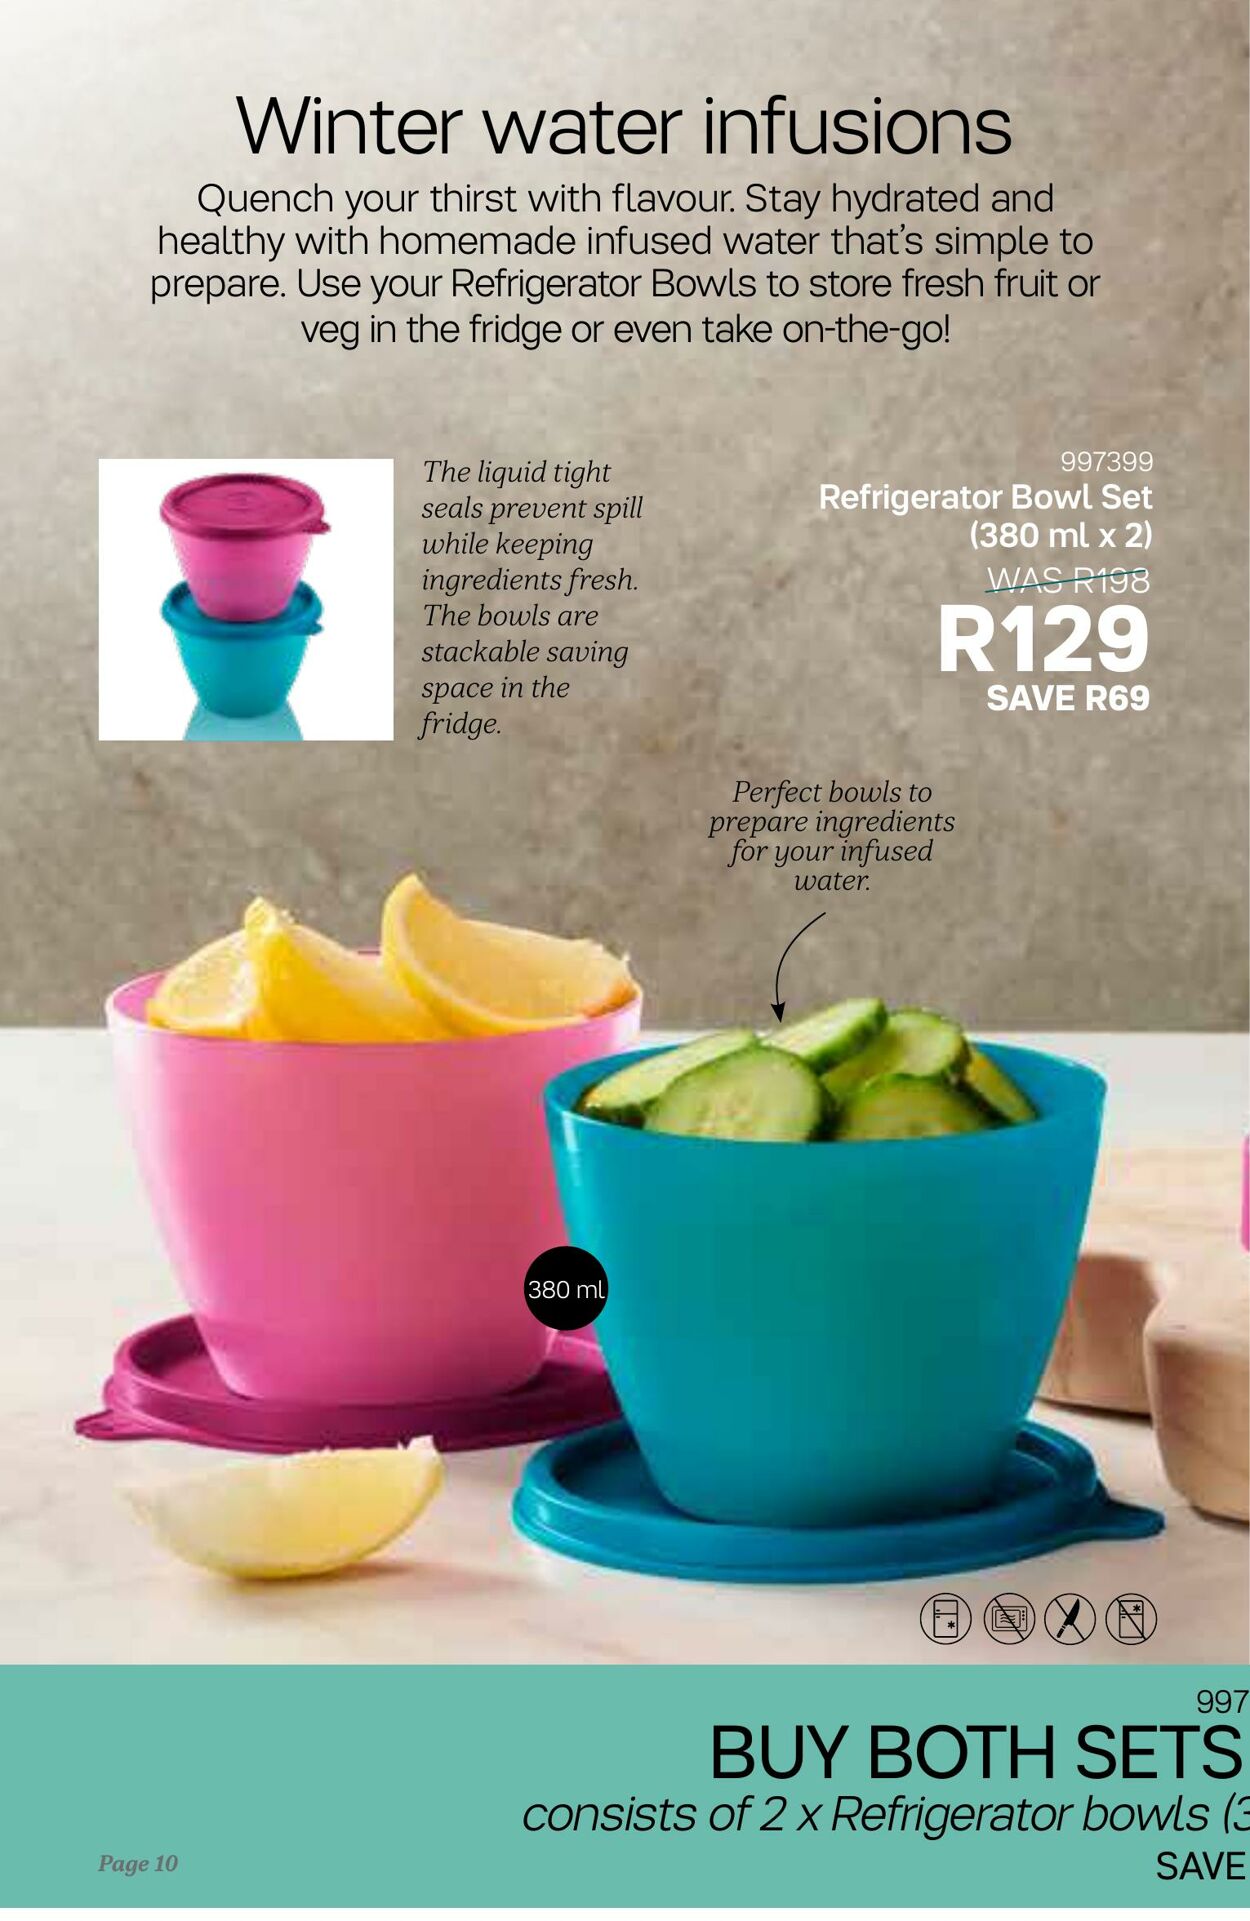 https://static.za-specials.com/images/promotions/tupperware/share-the-warmth-rsa-34c67b3c40/5071b6c7854c.jpg